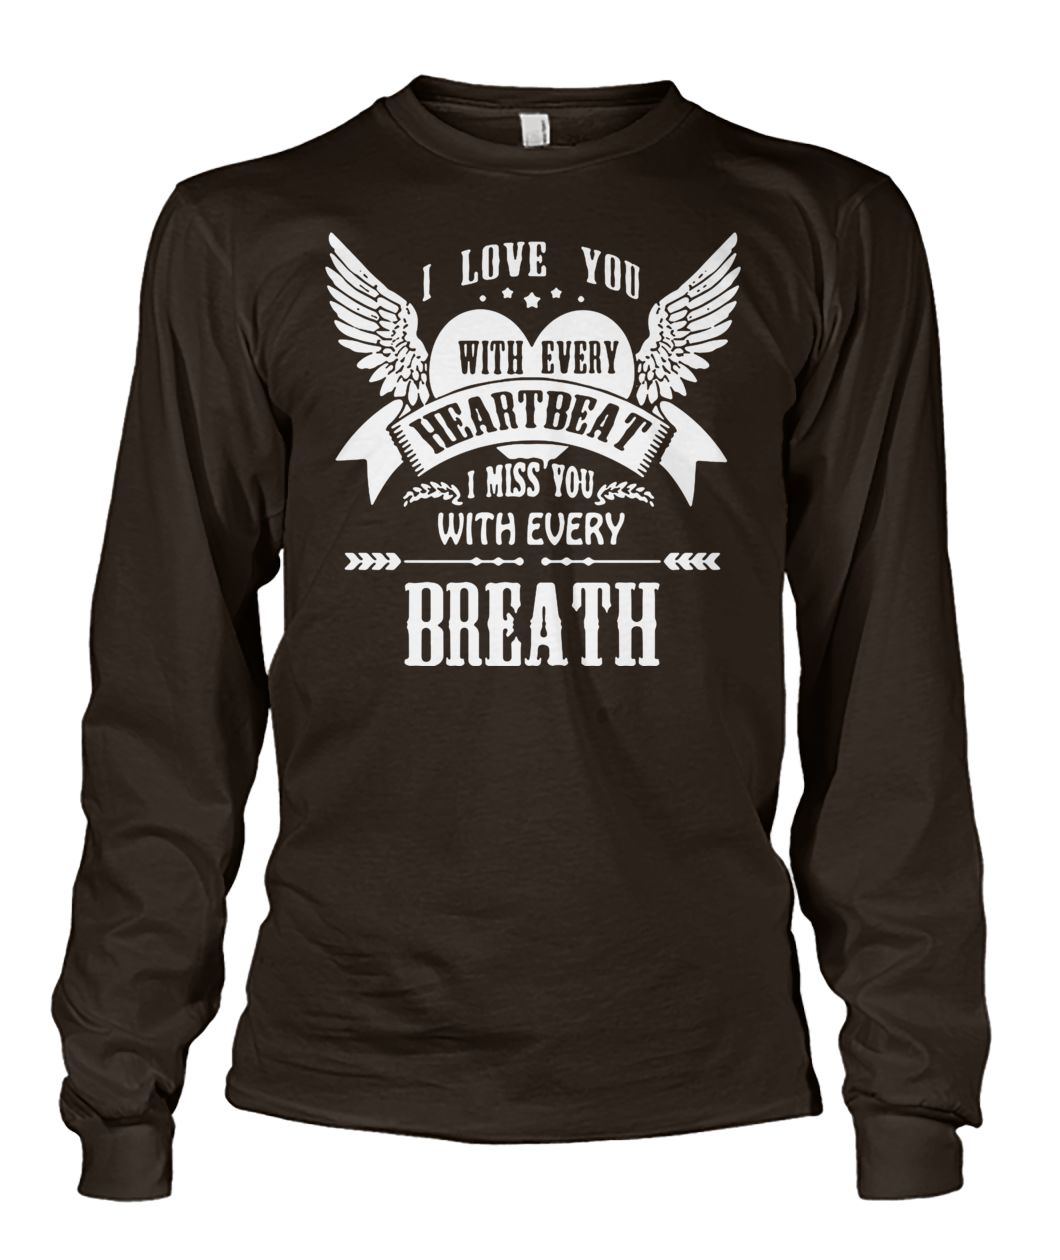 I love you with every heartbeat I miss you with every breath unisex long sleeve